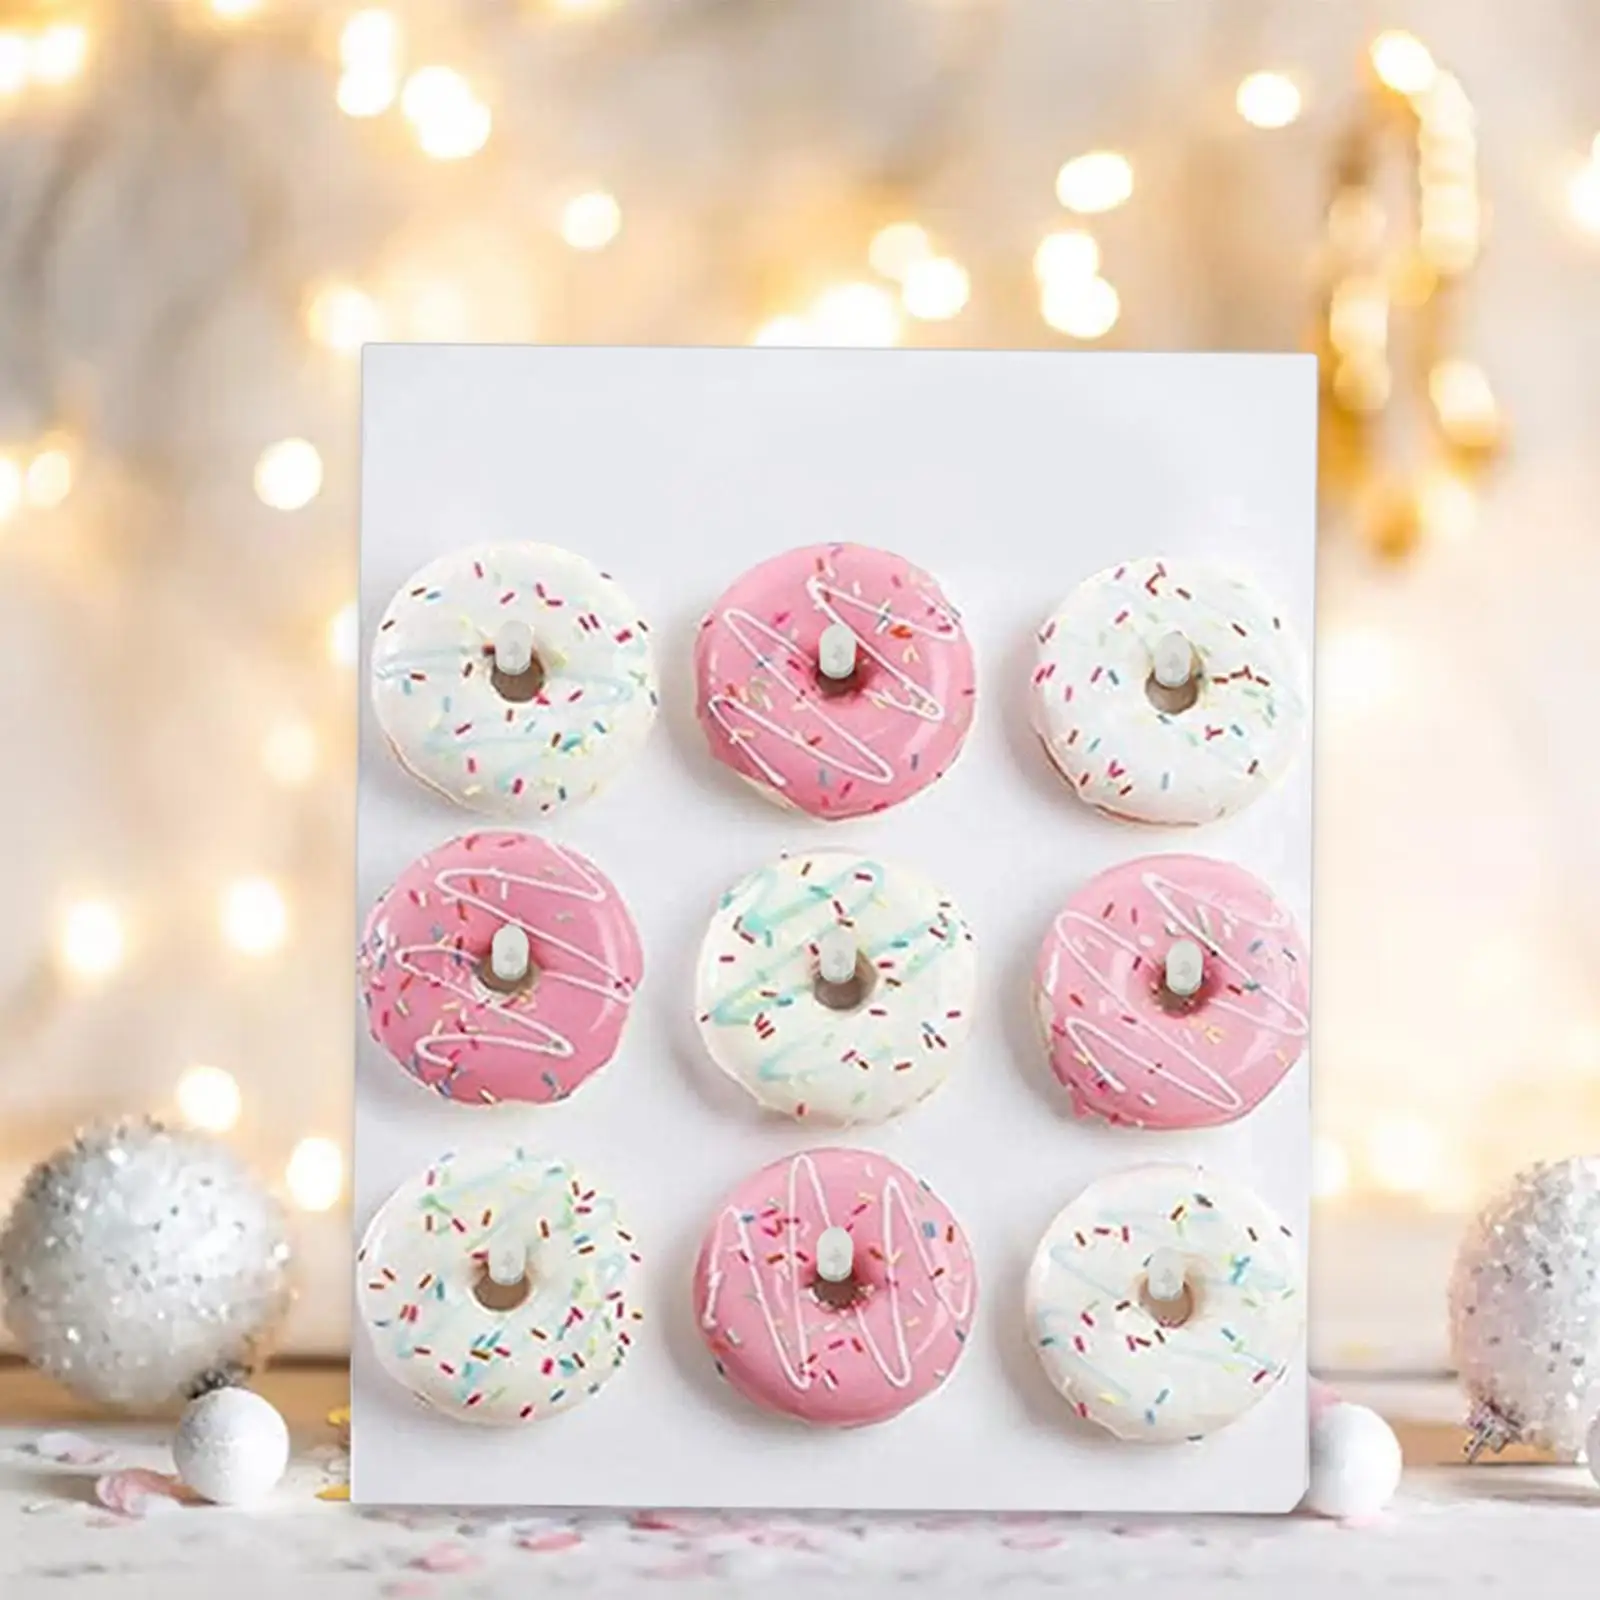 Donut Wall 9 Doughnuts Party Decorations White Donut Display Stand Reusable for Dessert Table Supplies Gathering Treat Holiday